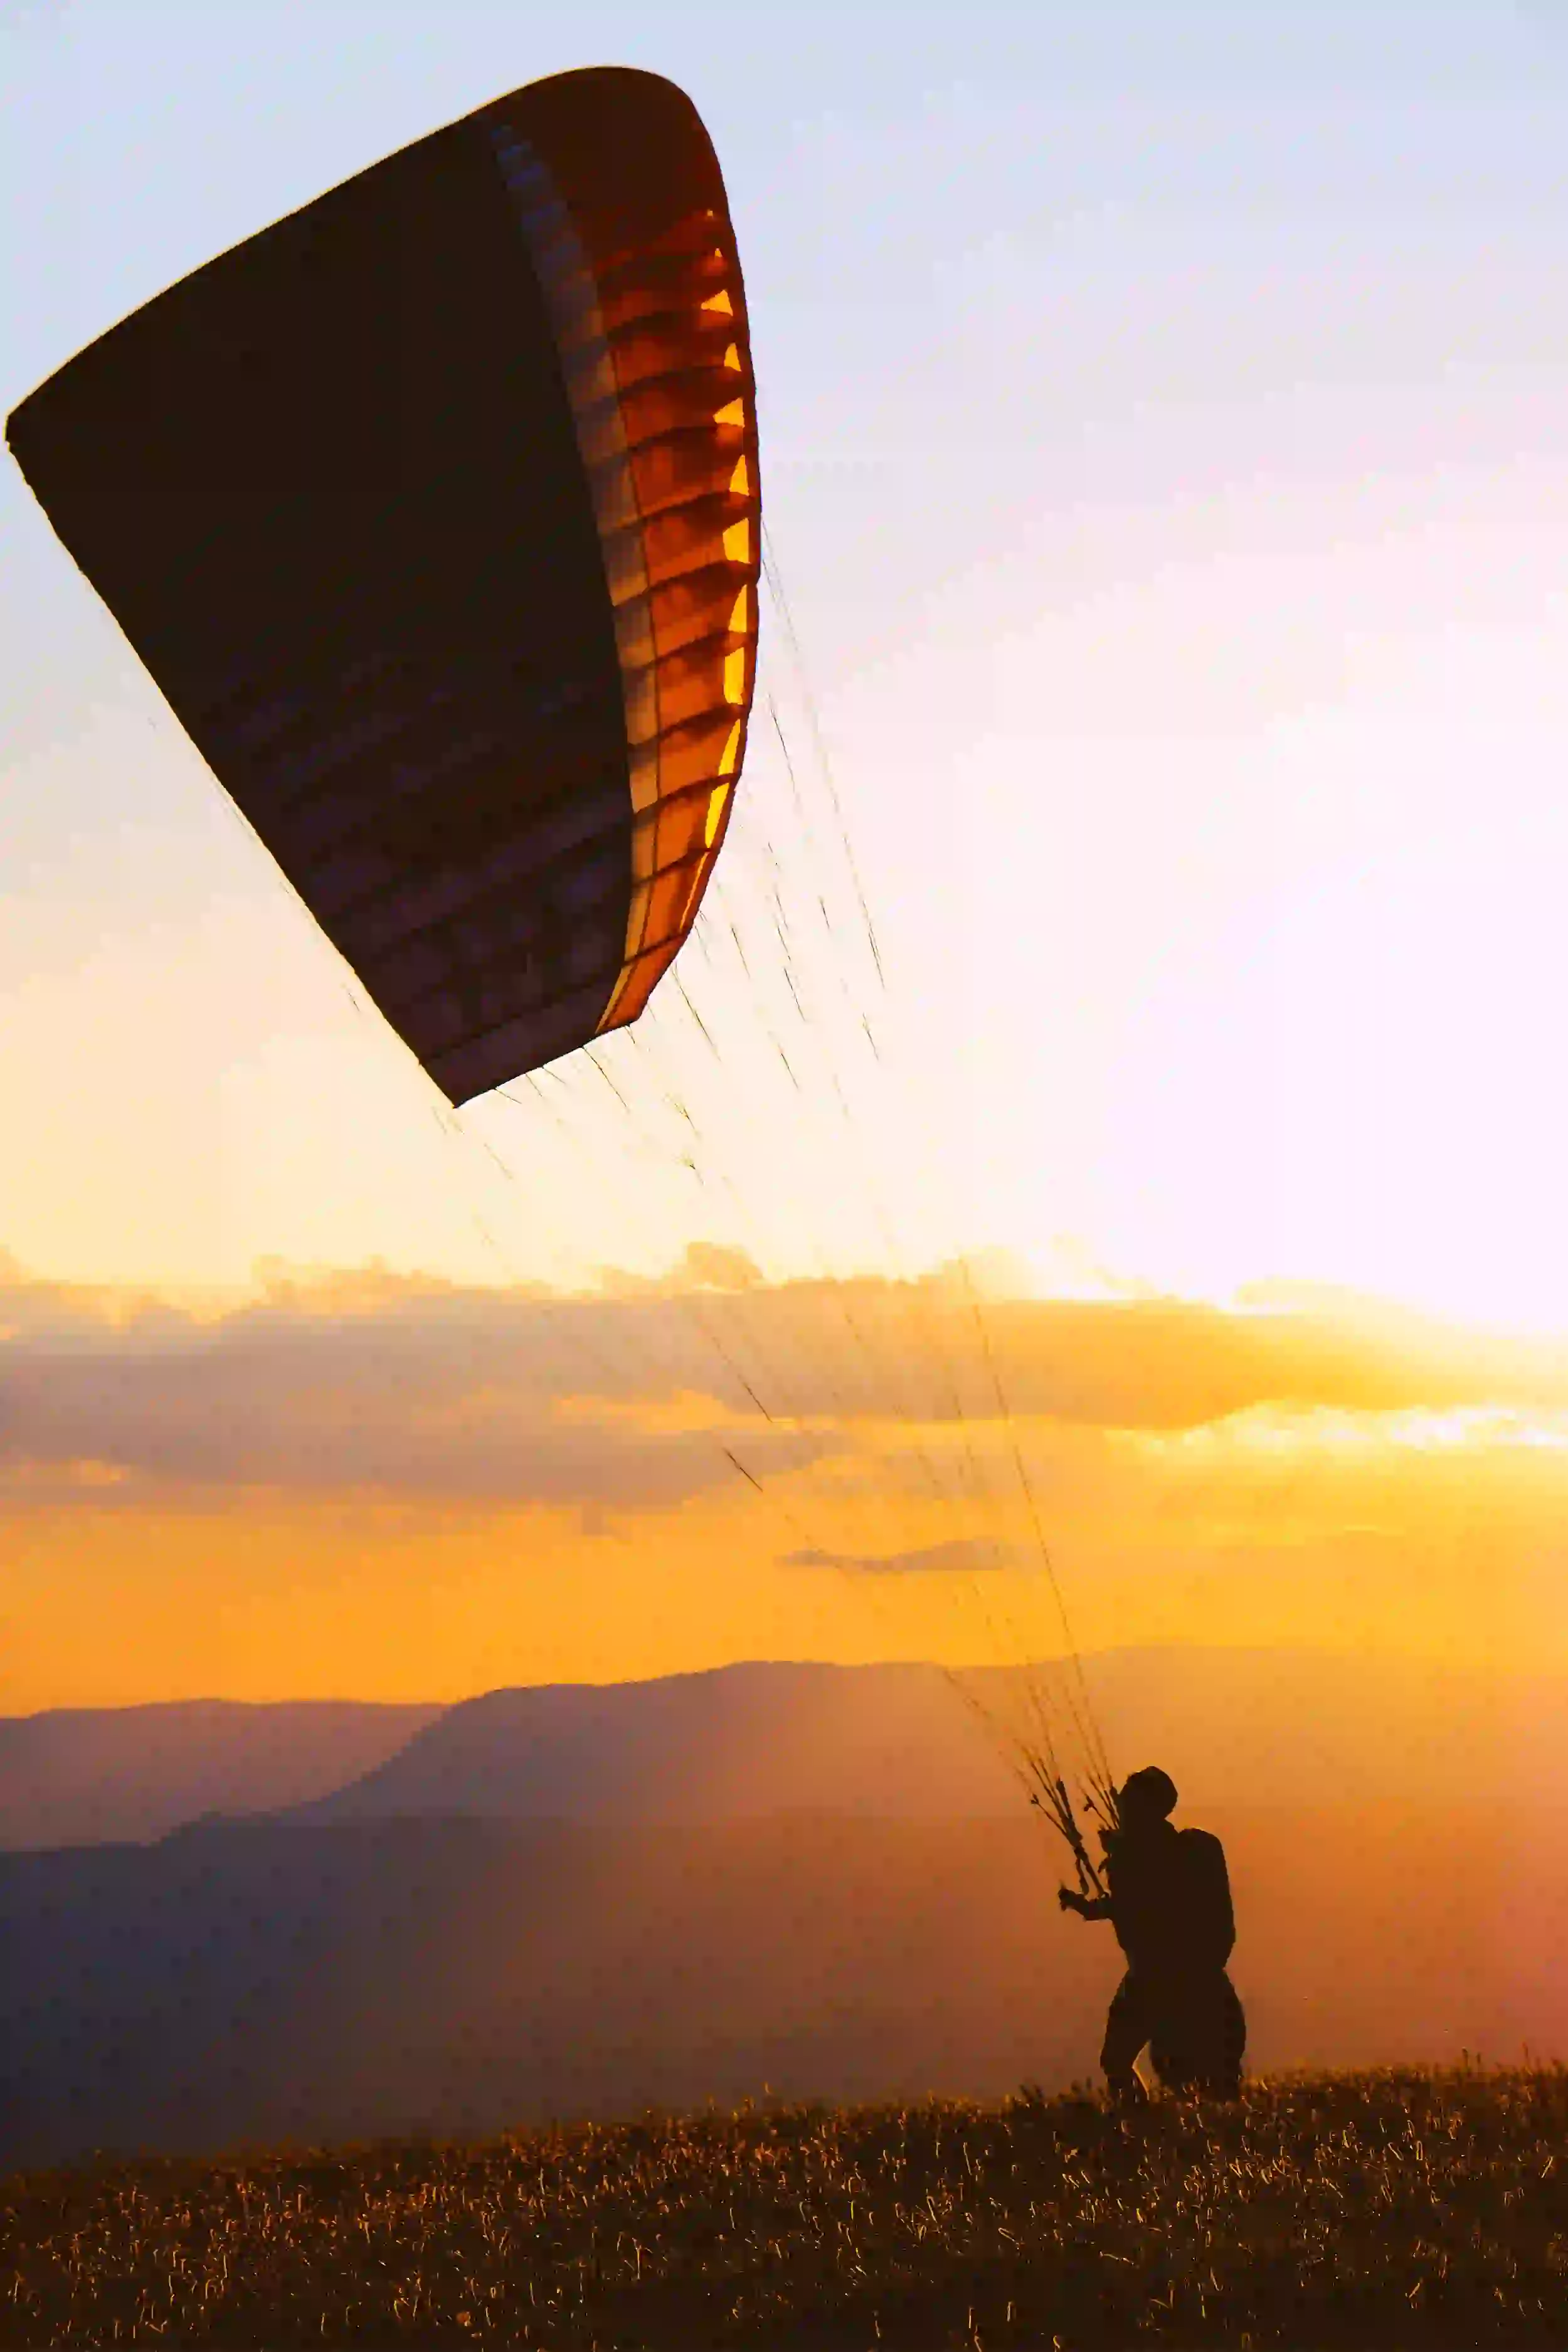 Camping with Paragliding in Nandi hills Bangalore